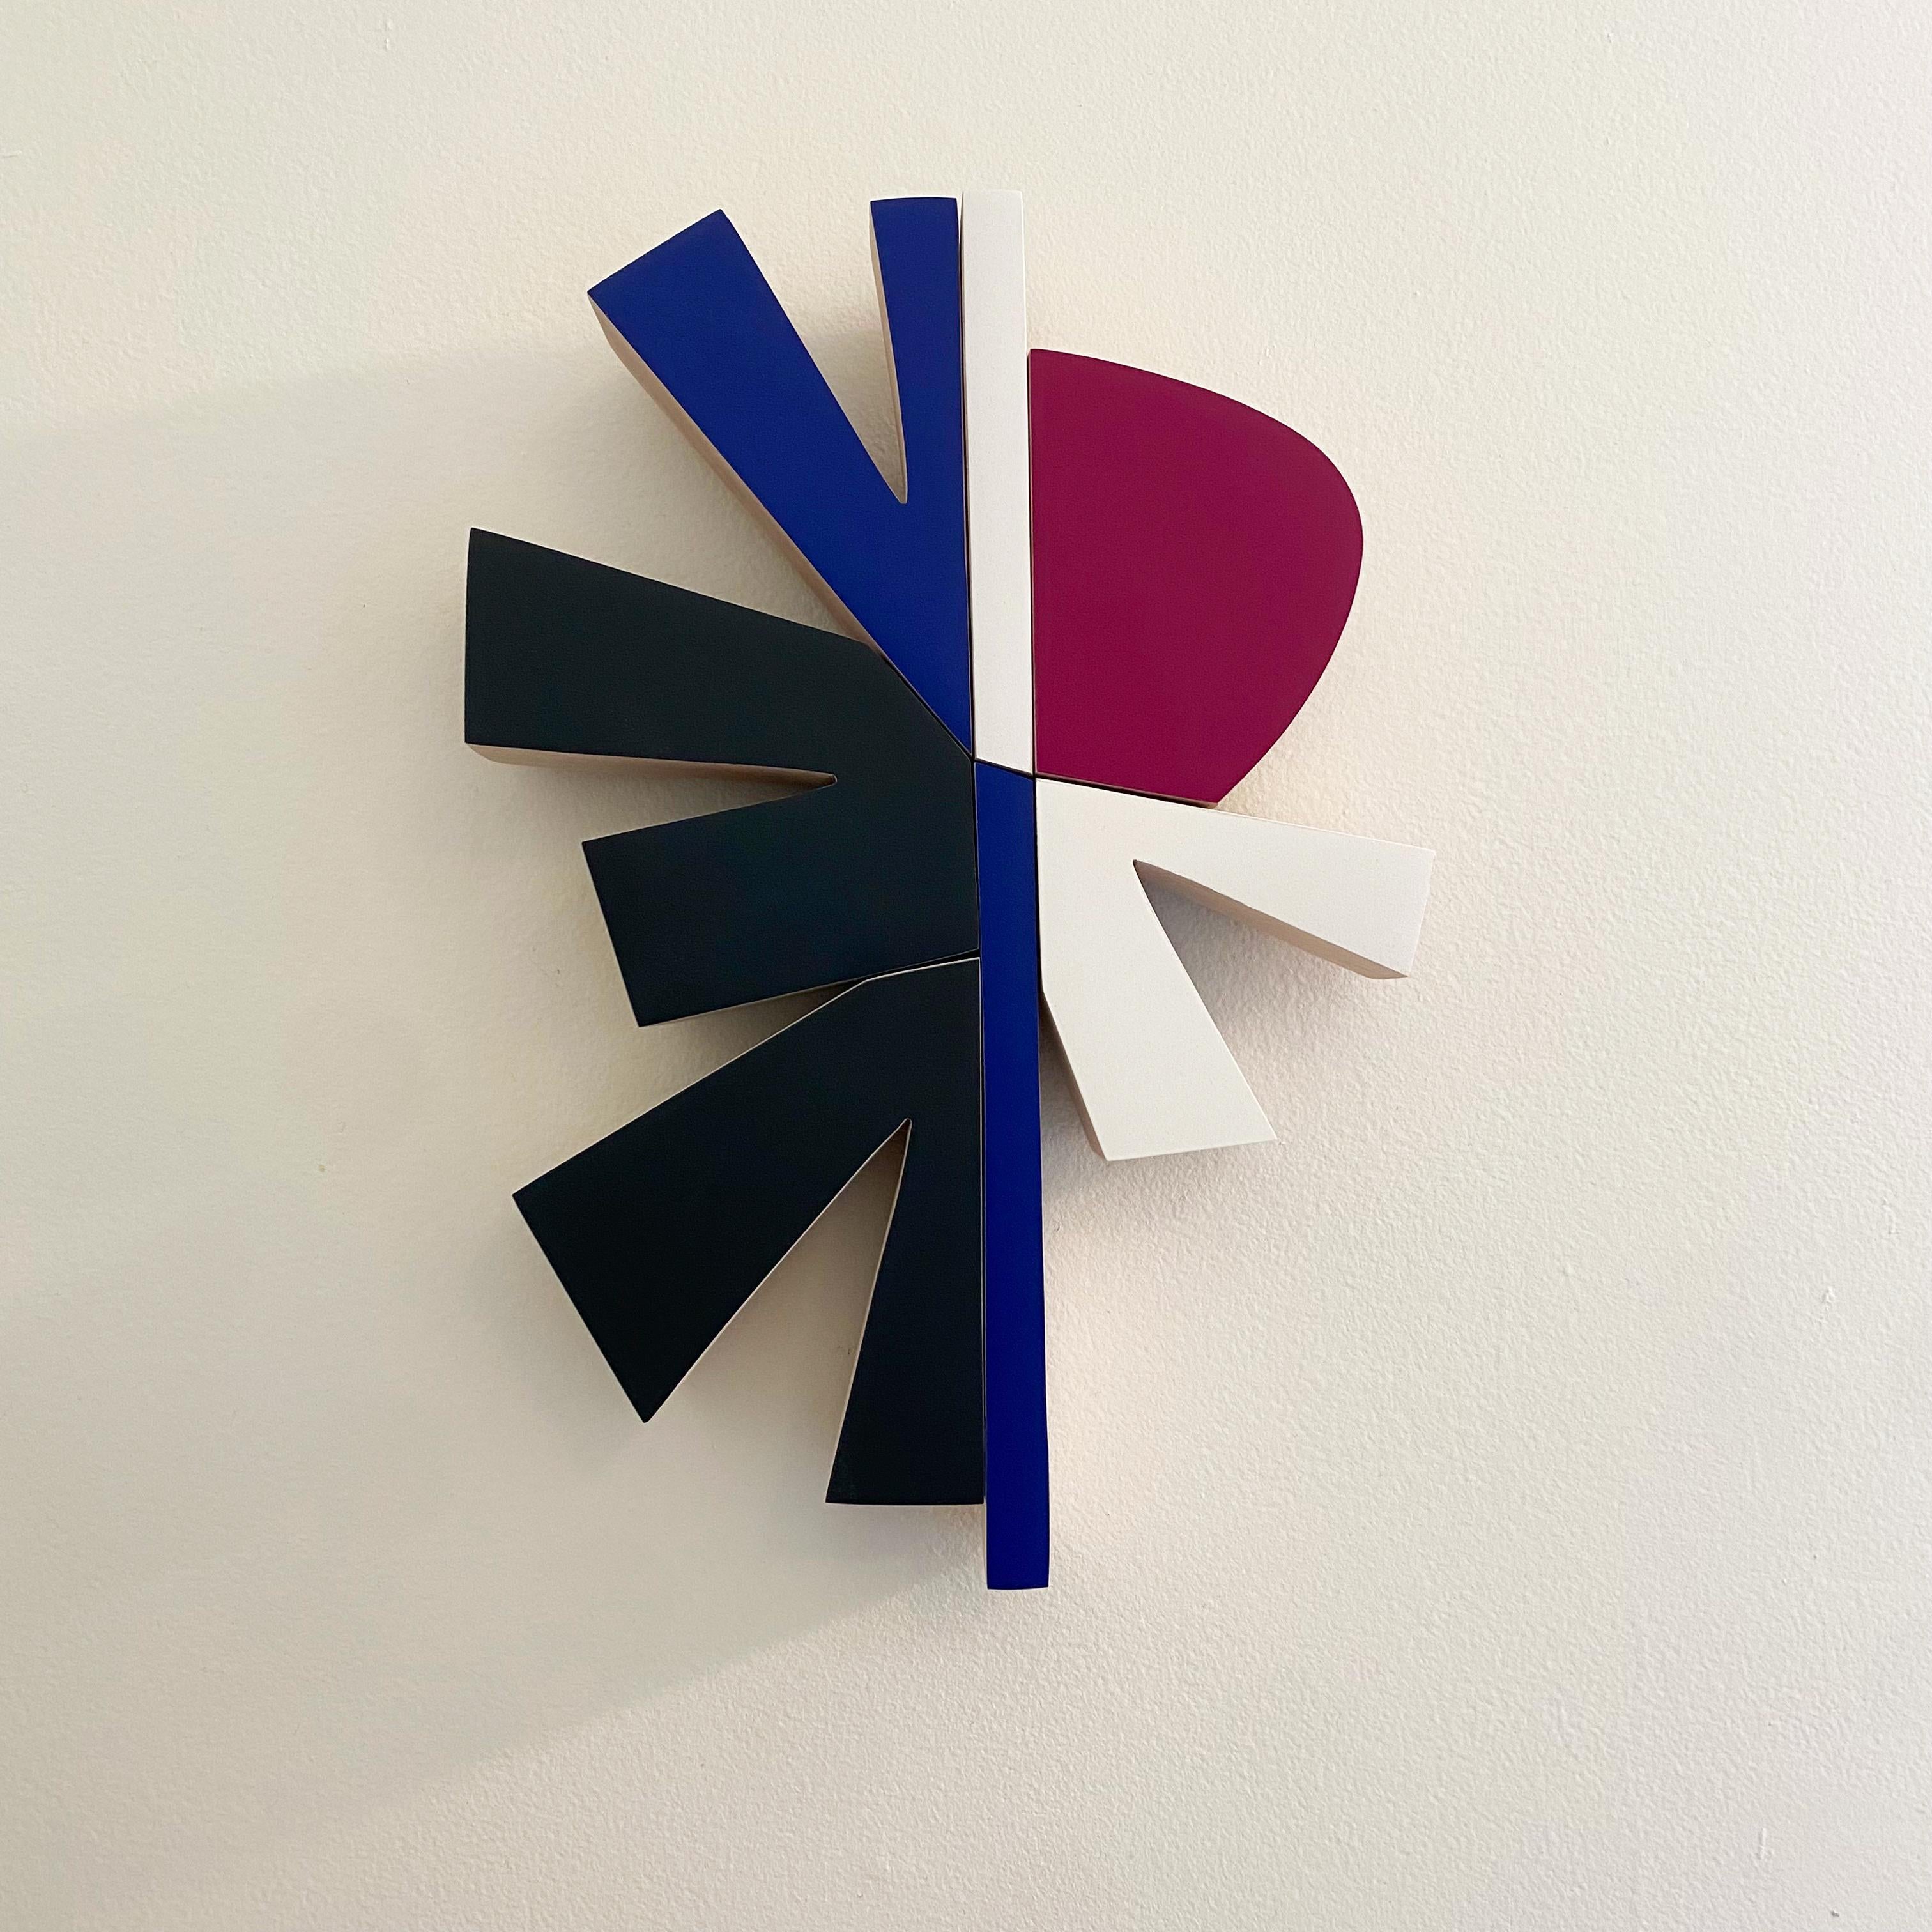 Acrylic on solid maple  matte clear coat

Small Pop series are minimalist driven, wood wall sculptures that are small and blocky and feature bright saturated colors. The pieces was inspired by my love for simple bold colors and modernist repeating